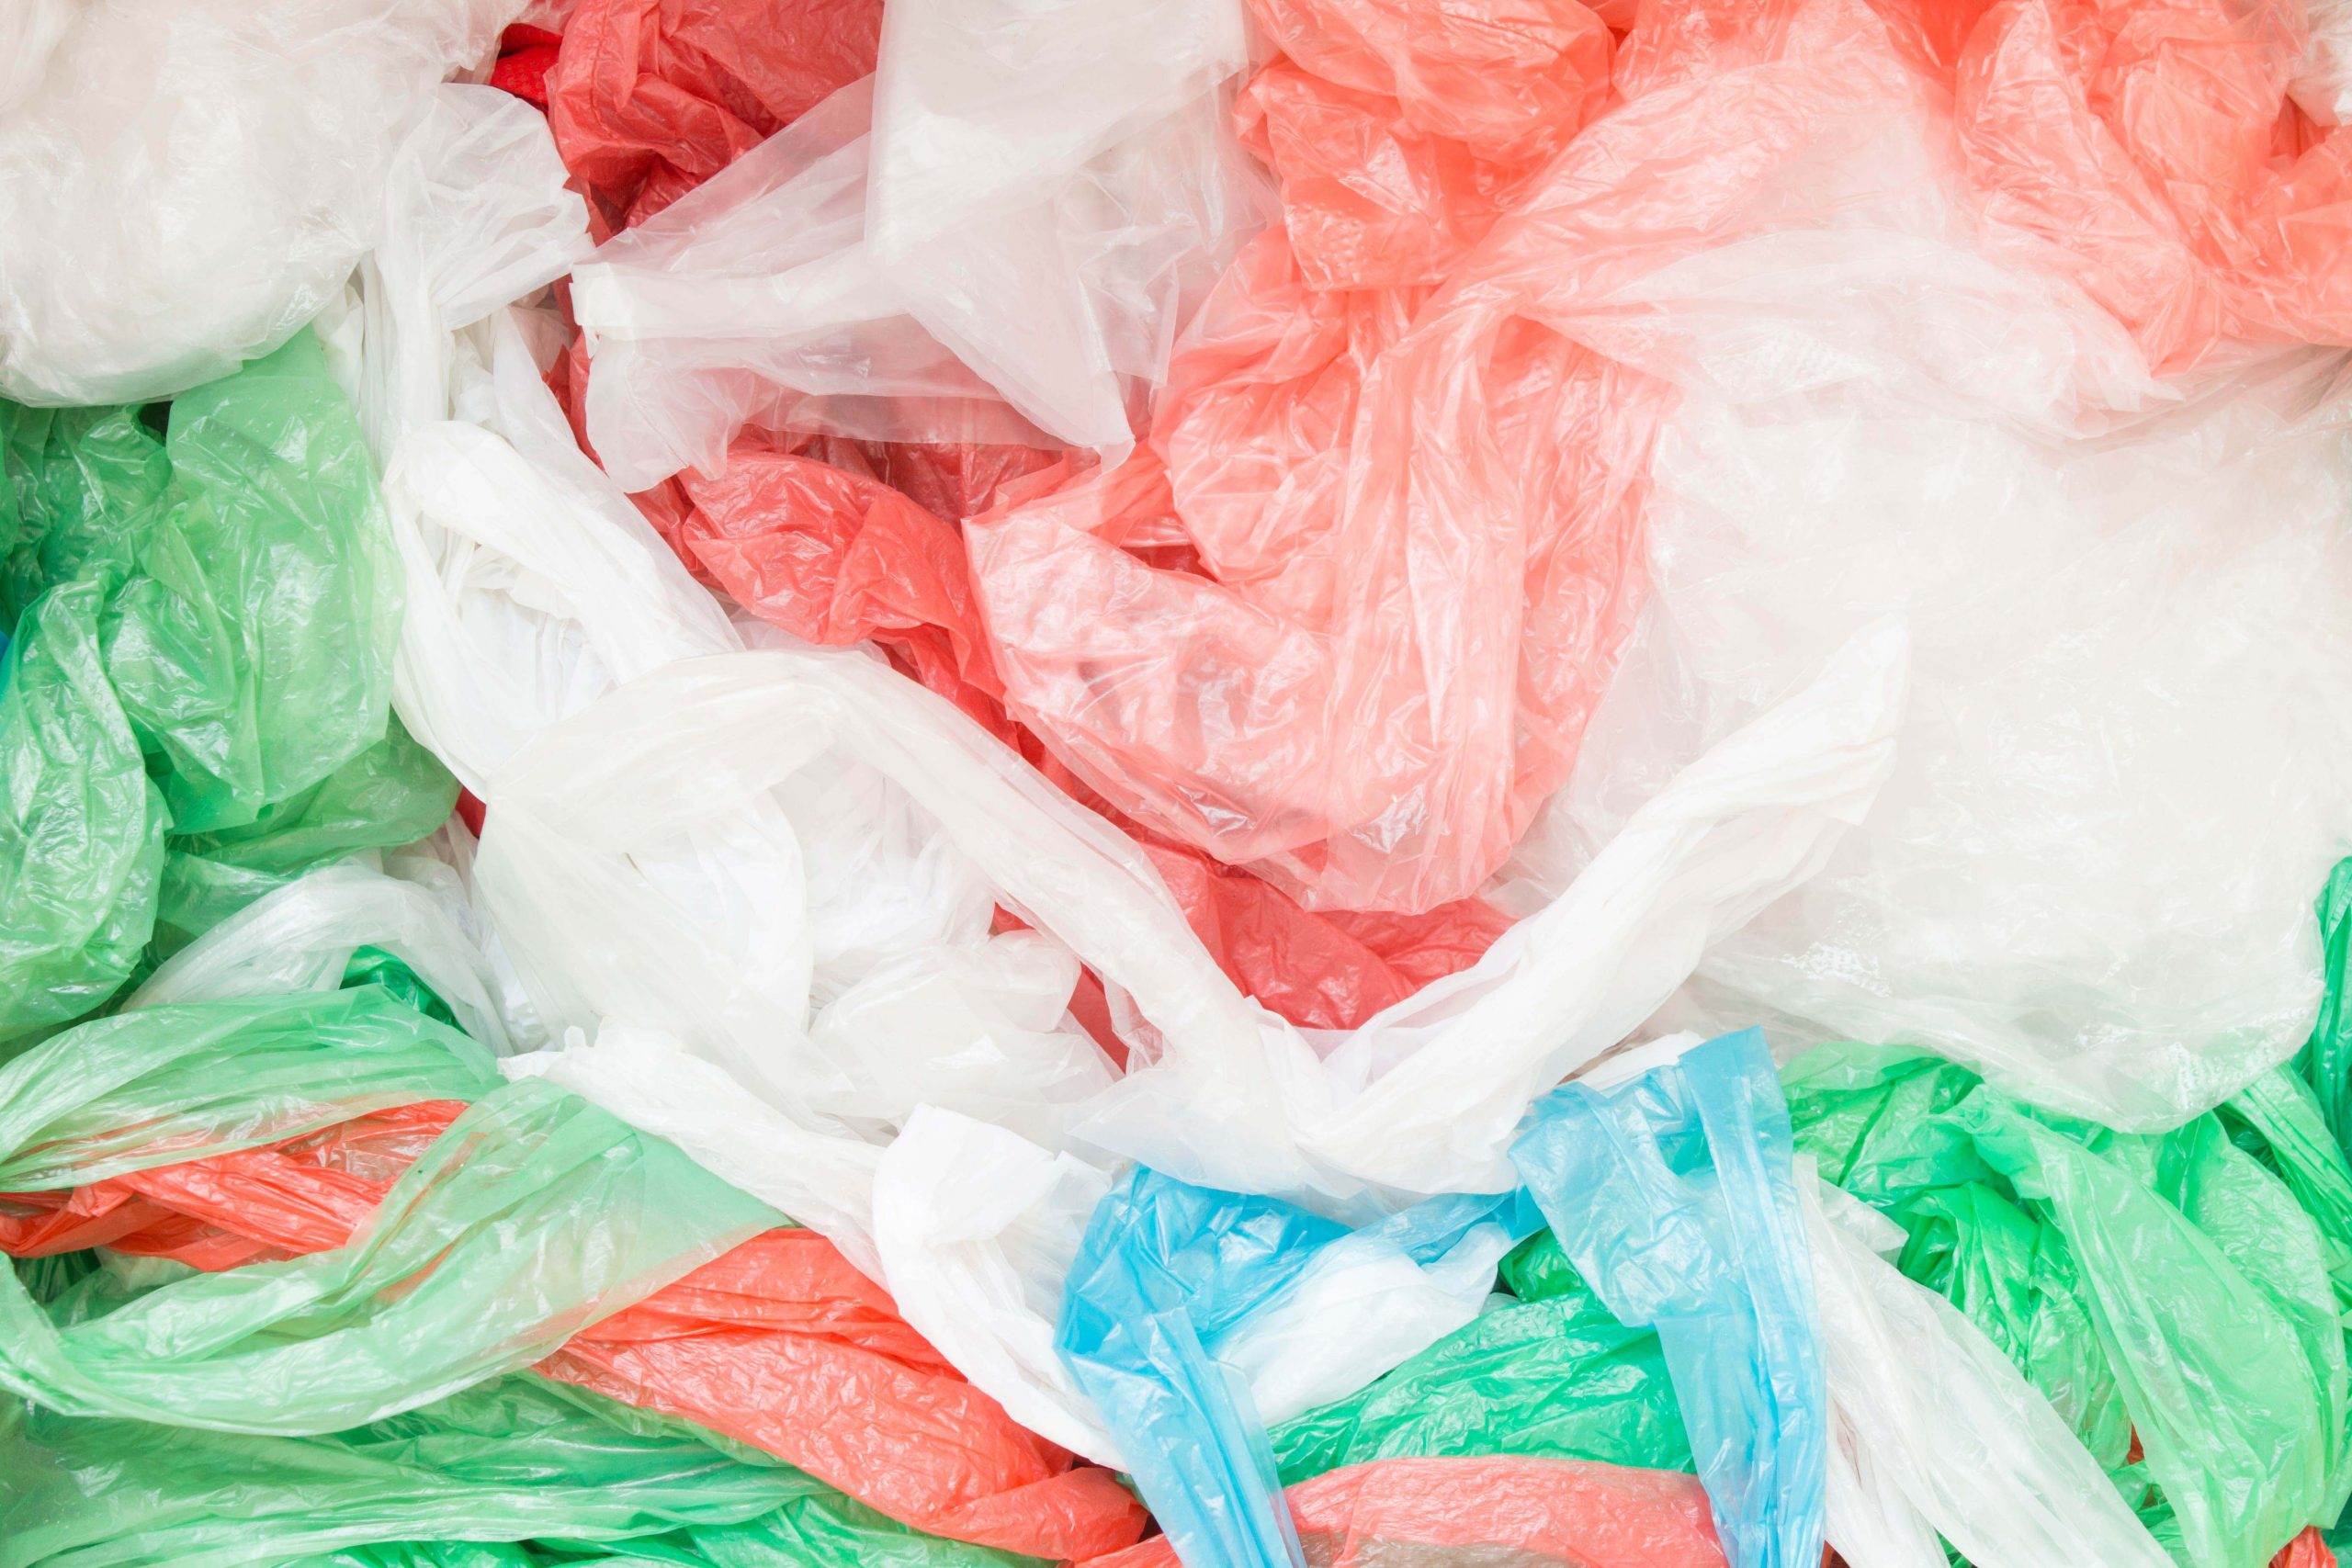 CEO: Plastic Is Not Going Away